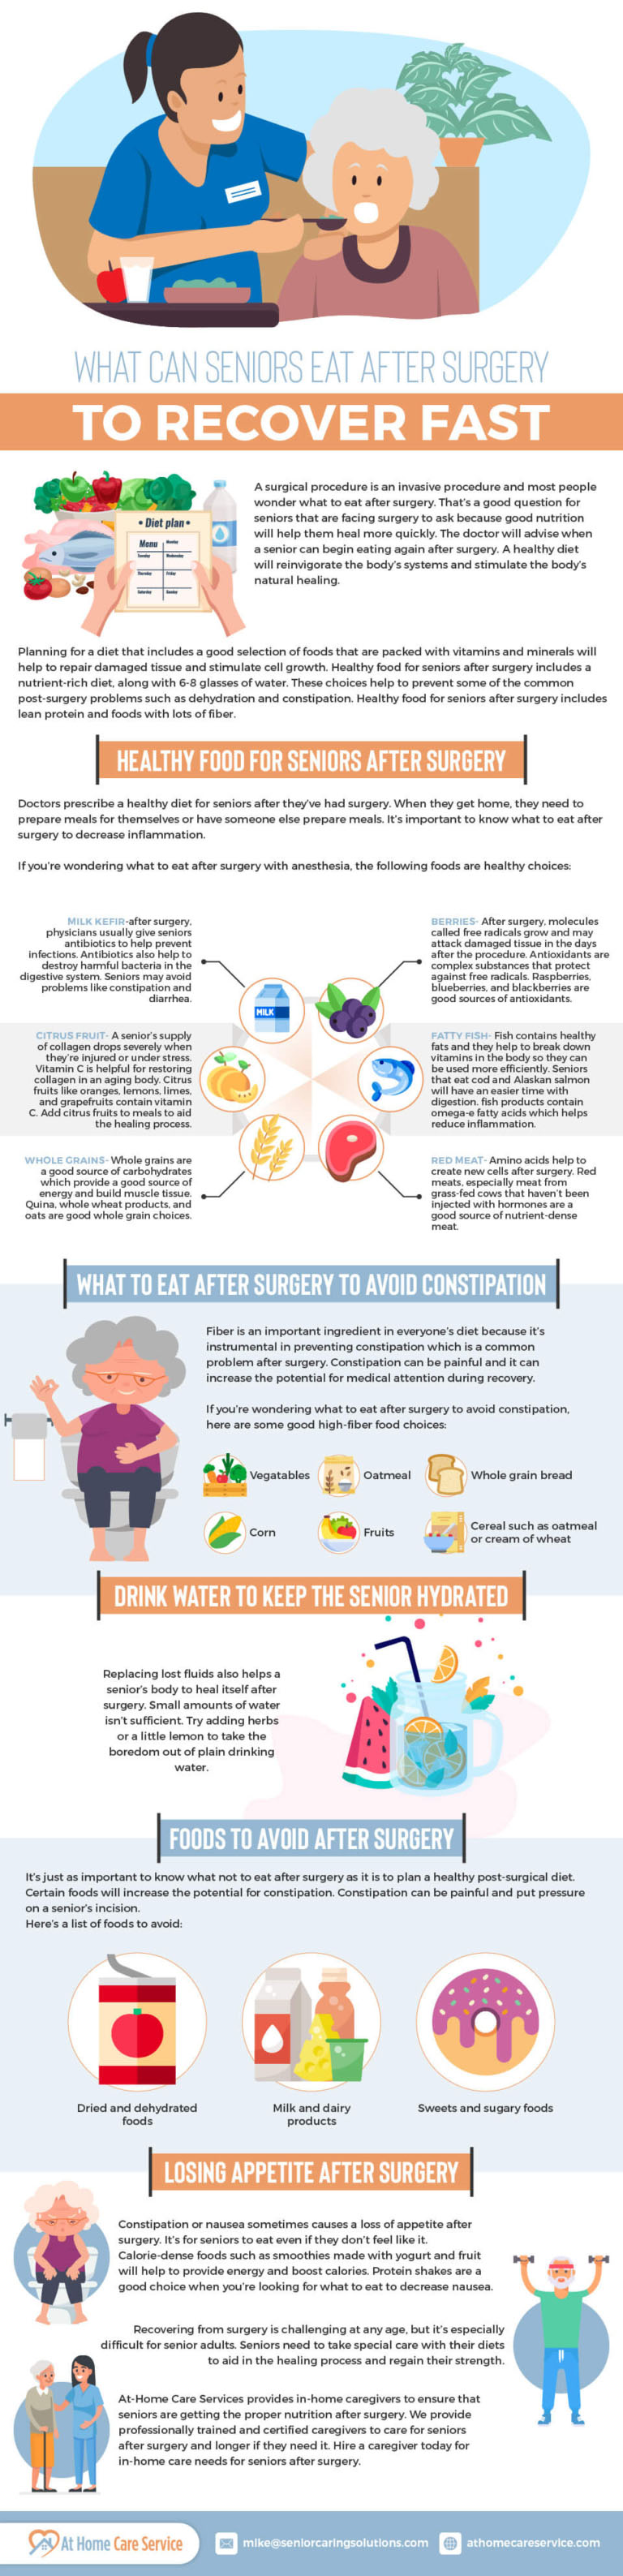 What Can Seniors Eat After Surgery to Recover Fast